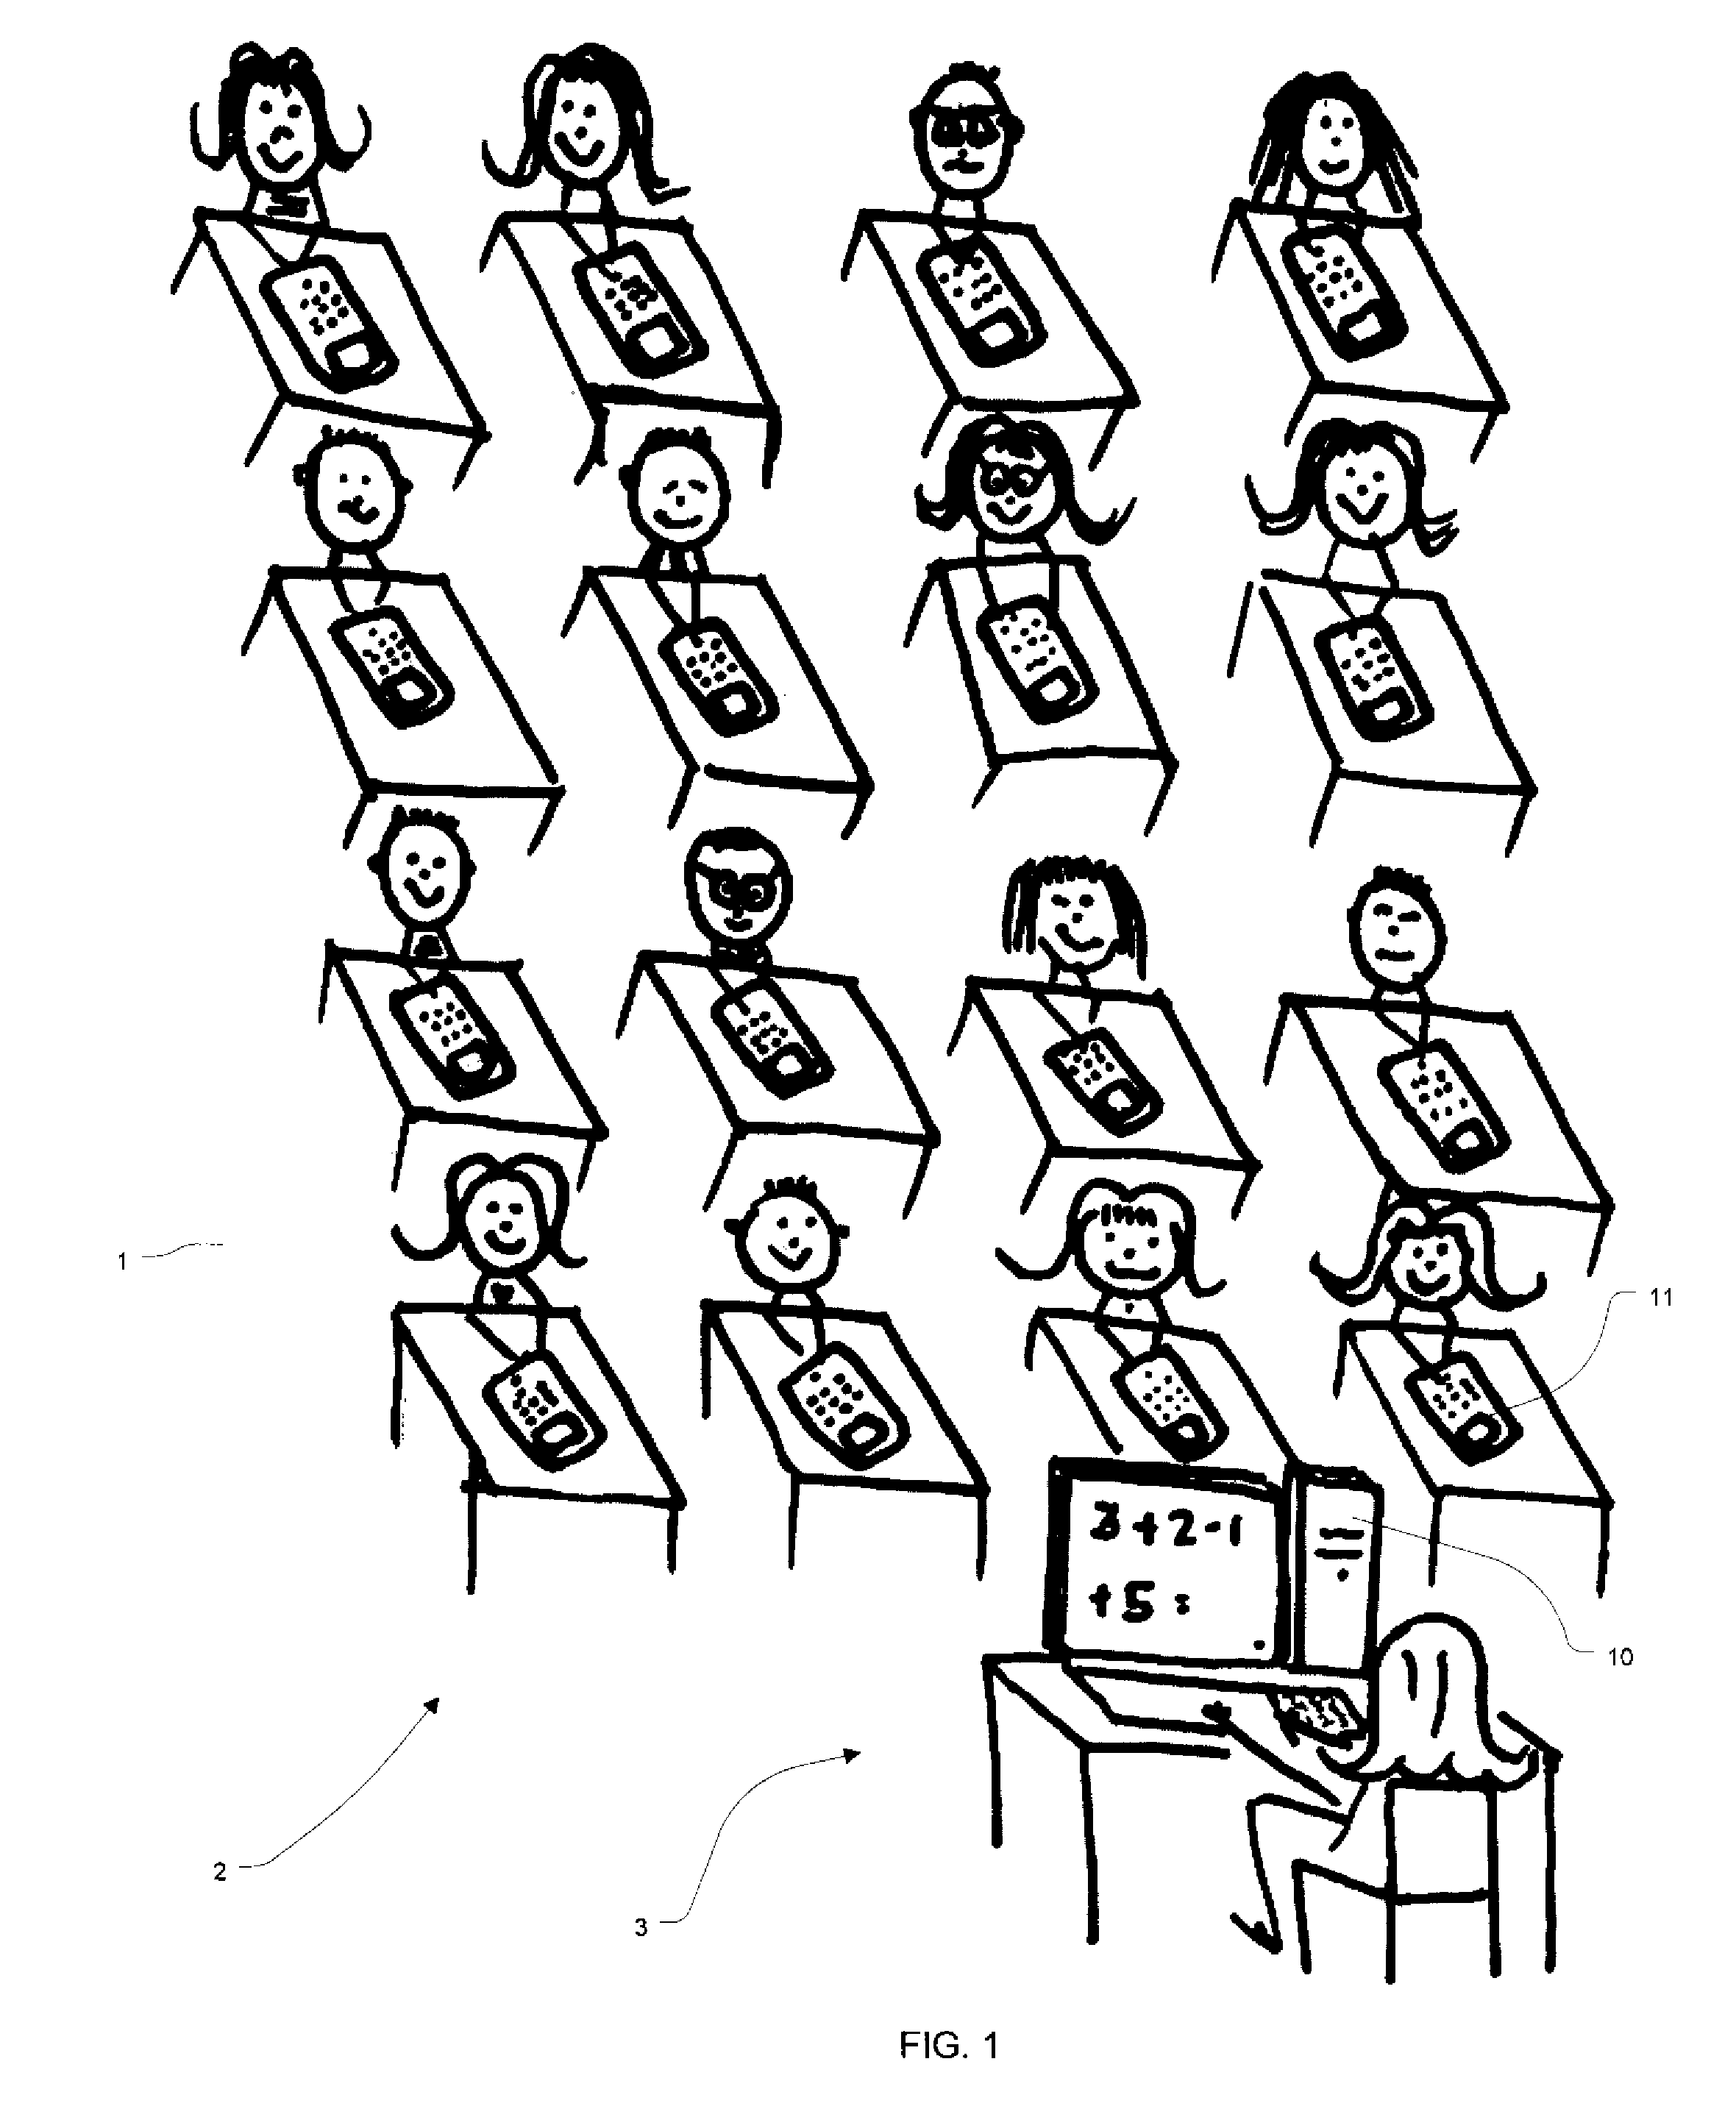 Network apparatus, system and method for teaching math